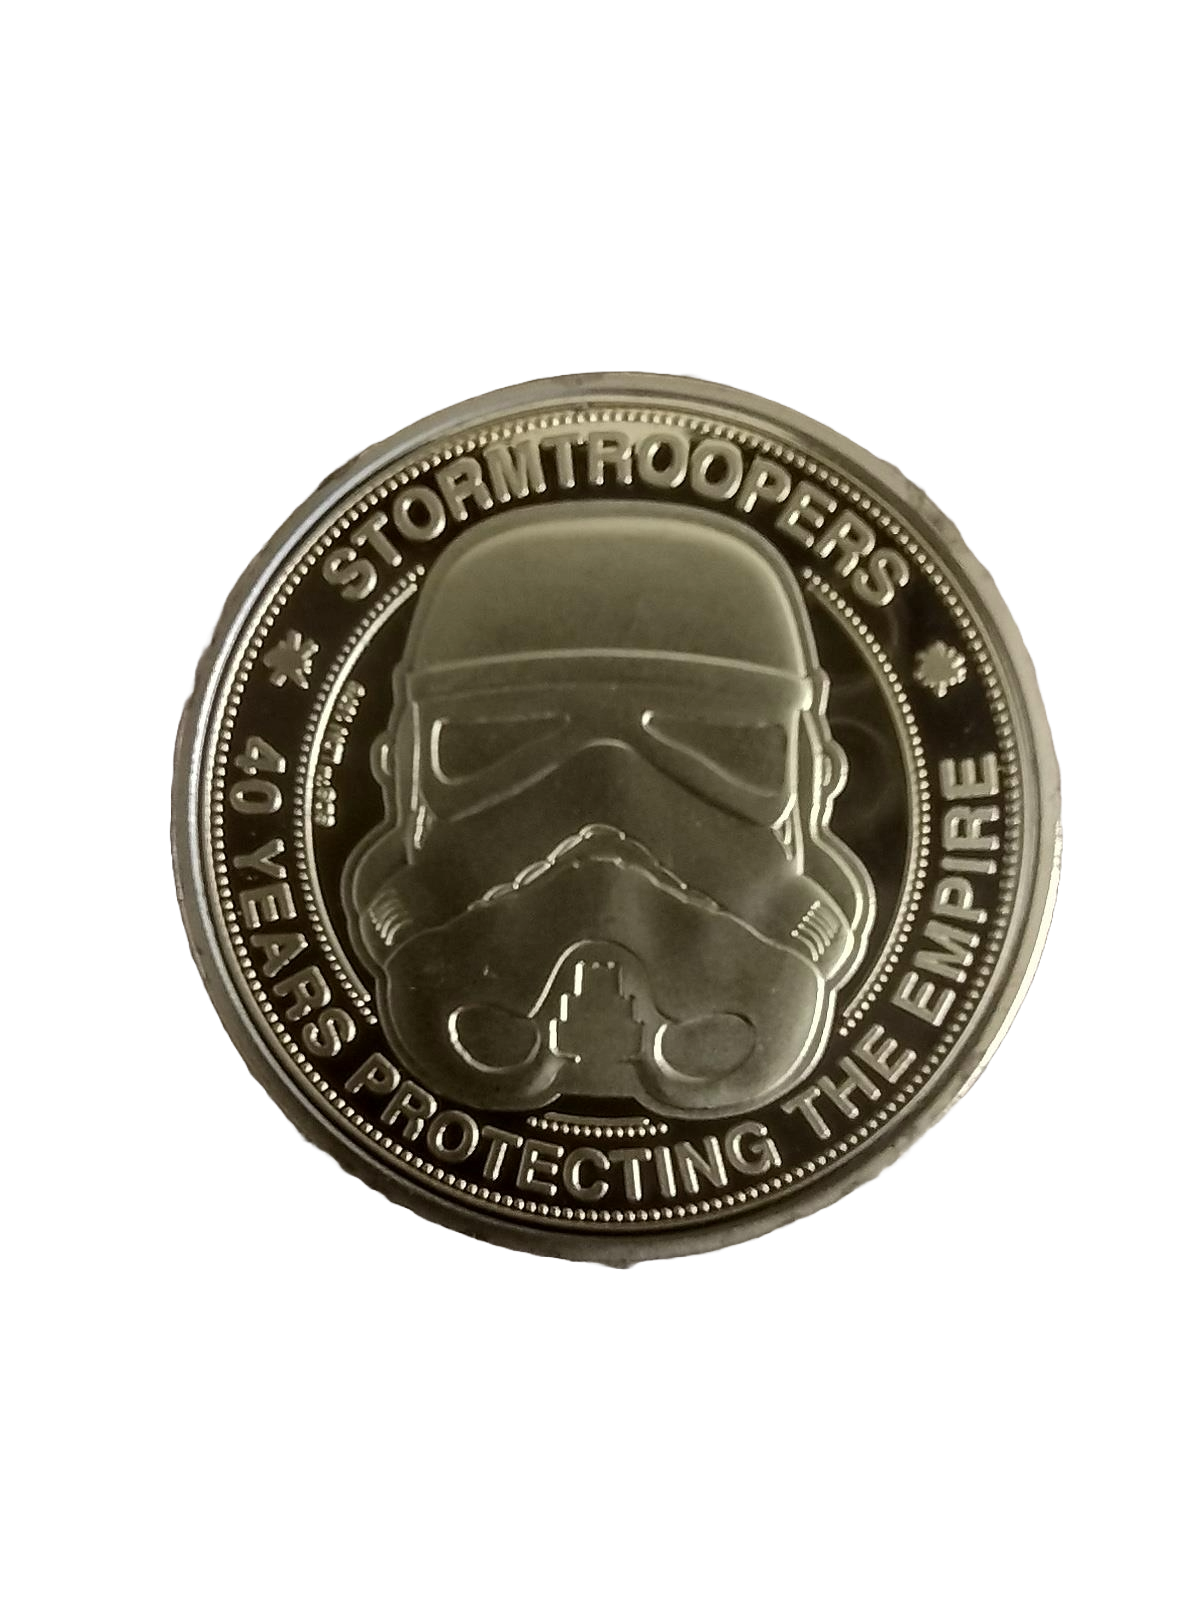 Limited Edition Shepperton Studios Storm Trooper Gold Coin